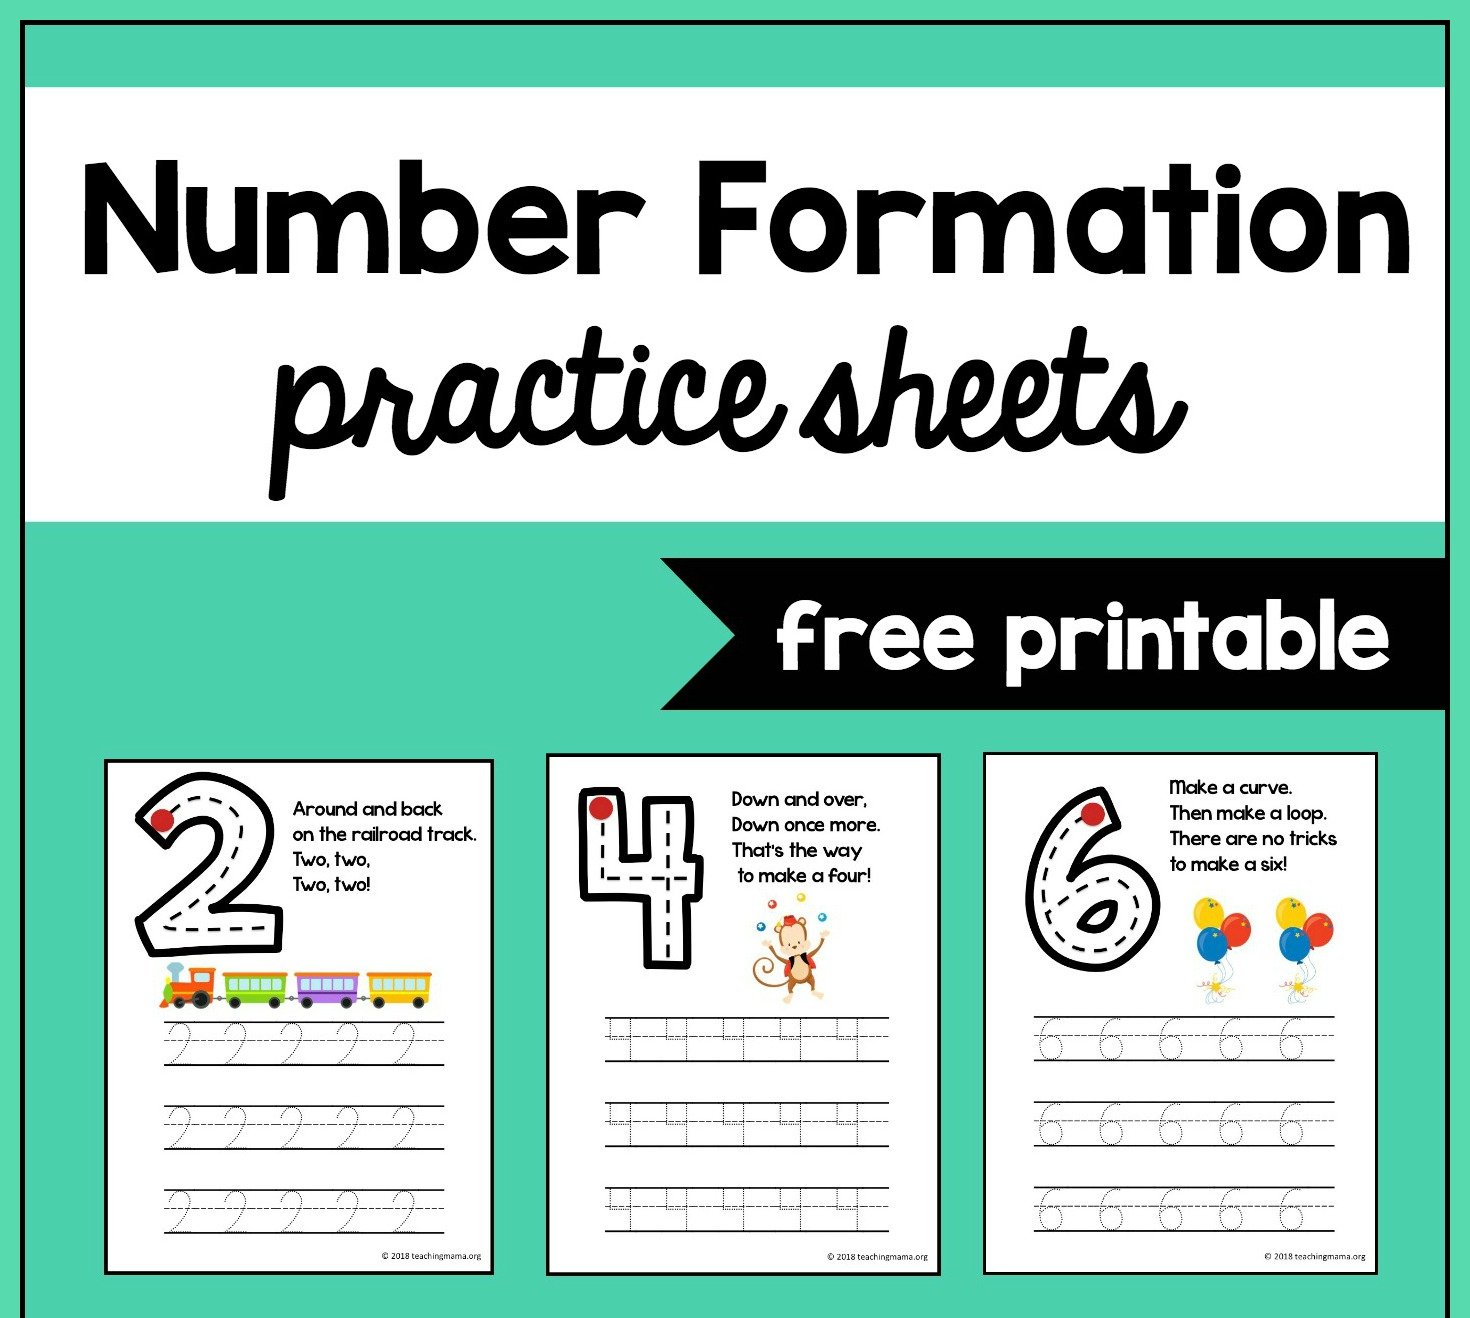 practice number sheets